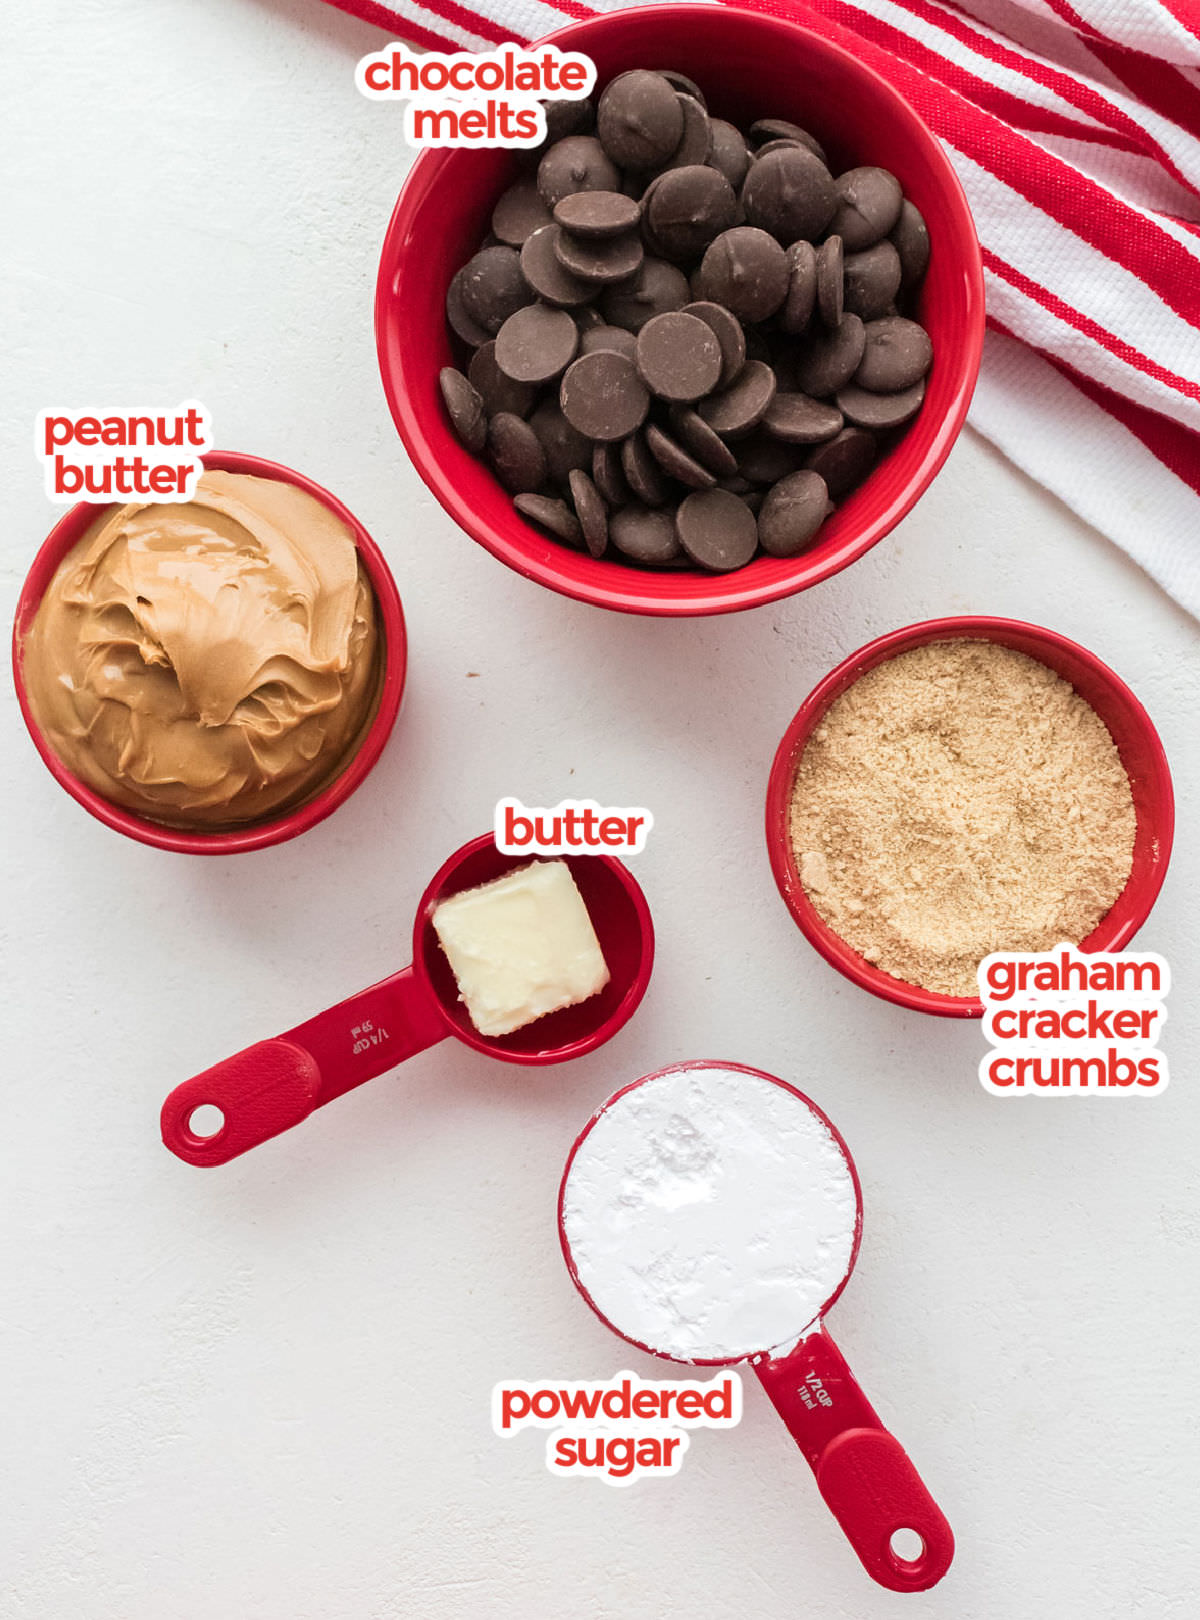 All the ingredients you will need to make Peanut Butter Balls including Peanut Butter, Chocolate, Graham Cracker crumbs, Powdered Sugar and  Butter.